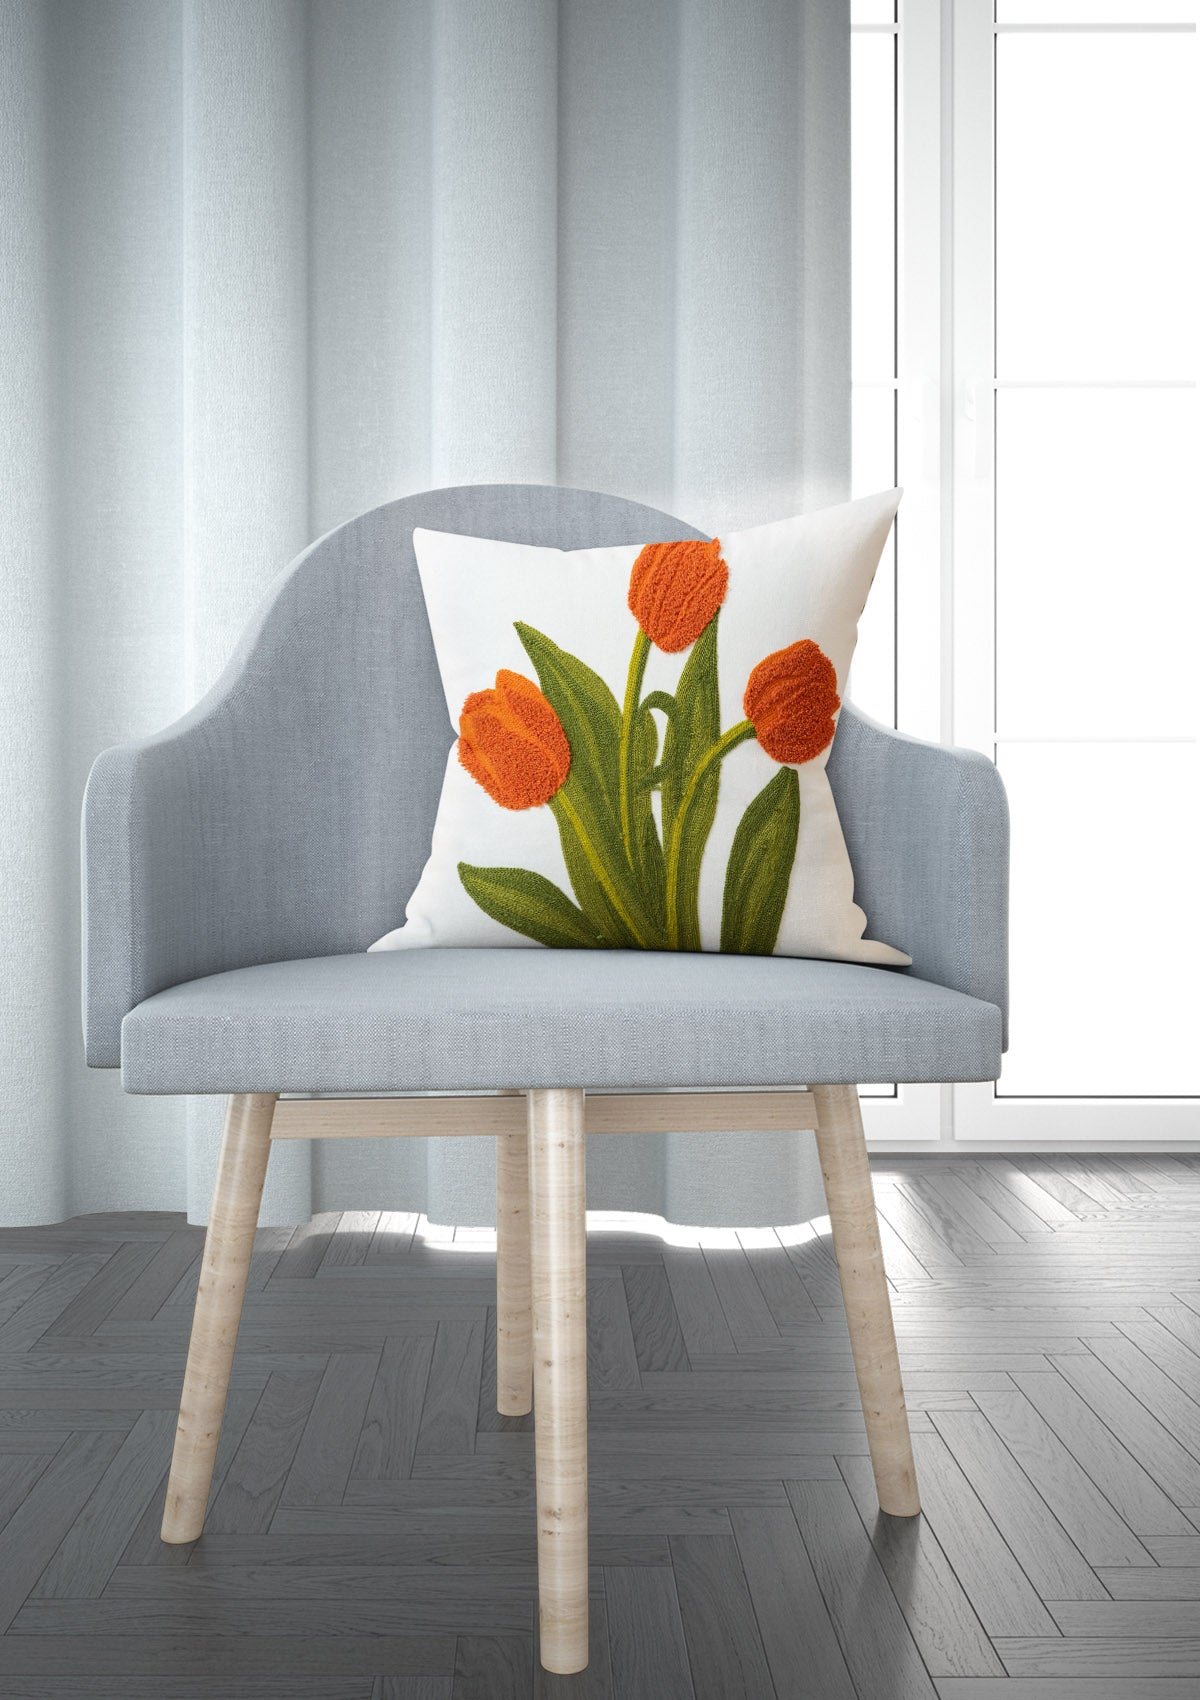 Cushion cover featuring vibrant tulip blooms in various colors, adding a touch of floral charm to your decor